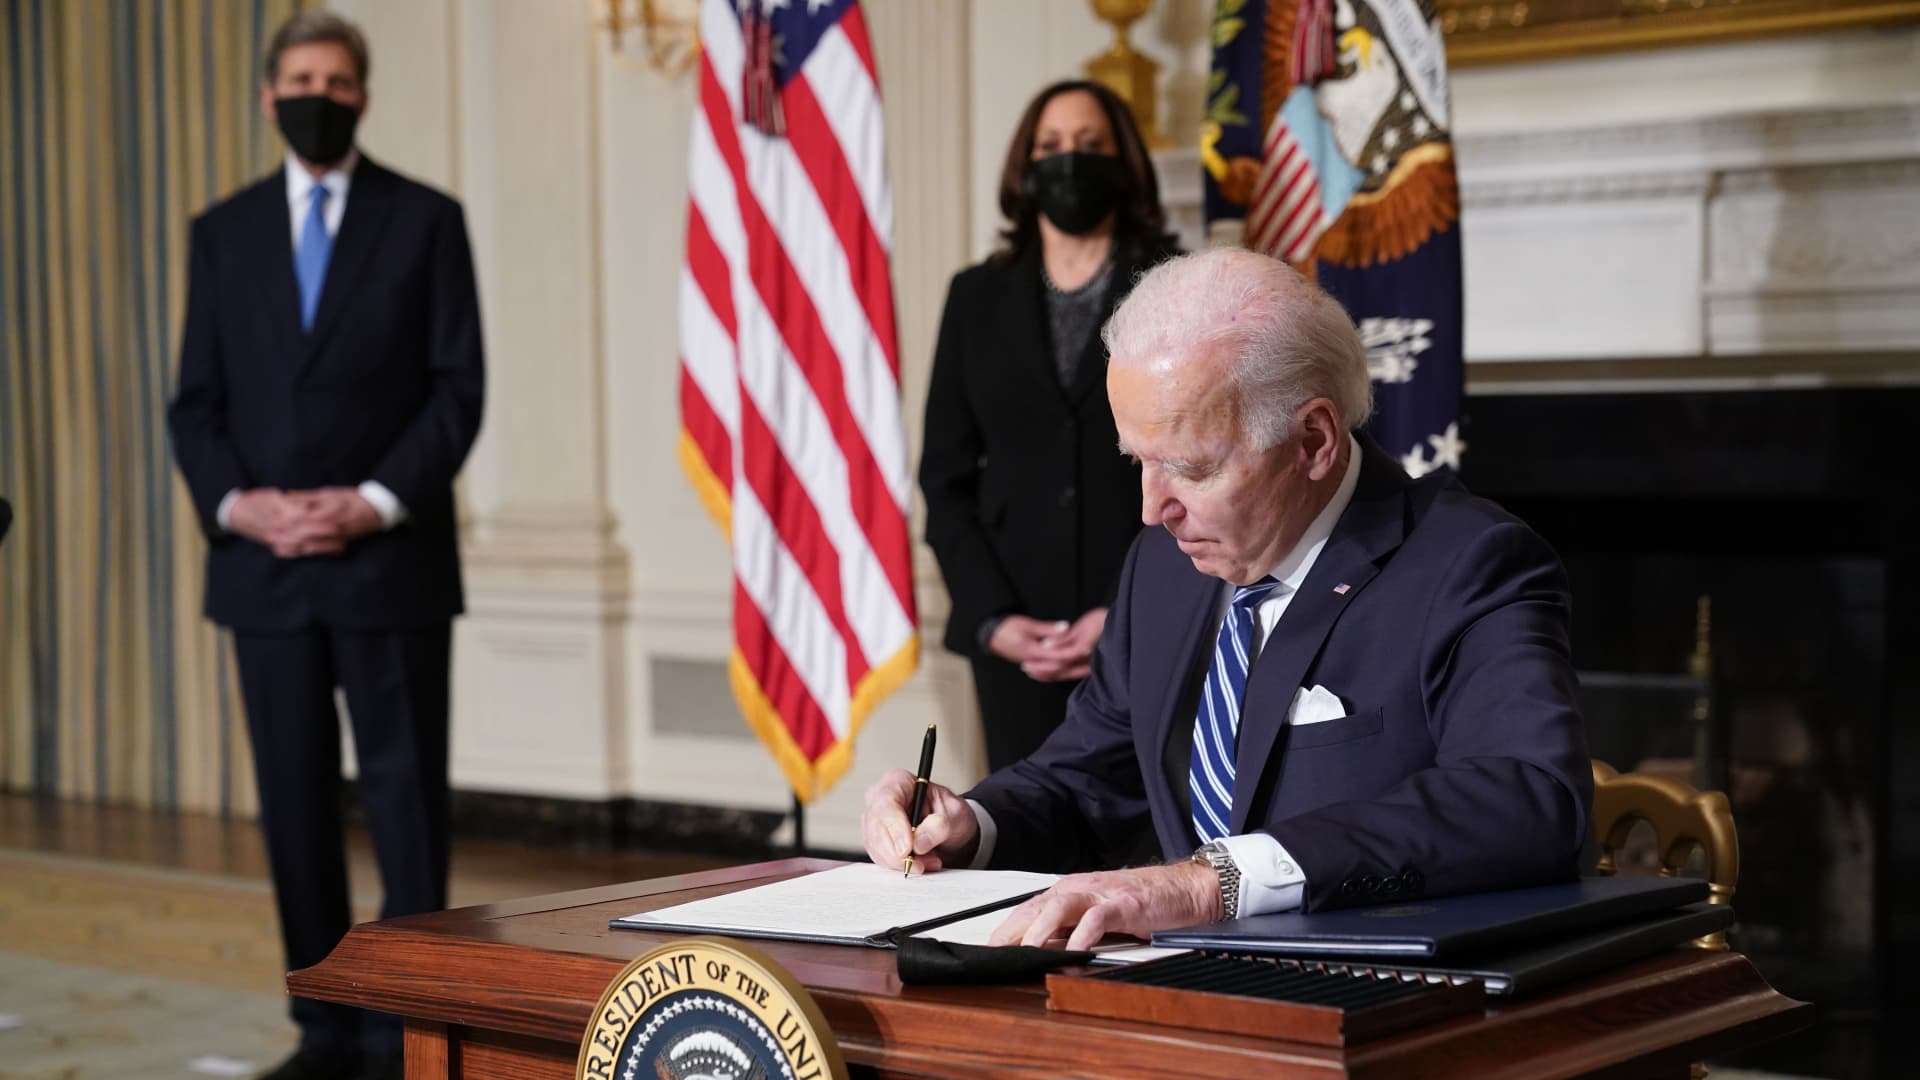 Vice President Kamala Harris (2-L) and Special Presidential Envoy for Climate John Kerry (L) watch as US President Joe Biden signs executive orders after speaking on tackling climate change, creating jobs, and restoring scientific integrity in the State Dining Room of the White House in Washington, DC on January 27, 2021.